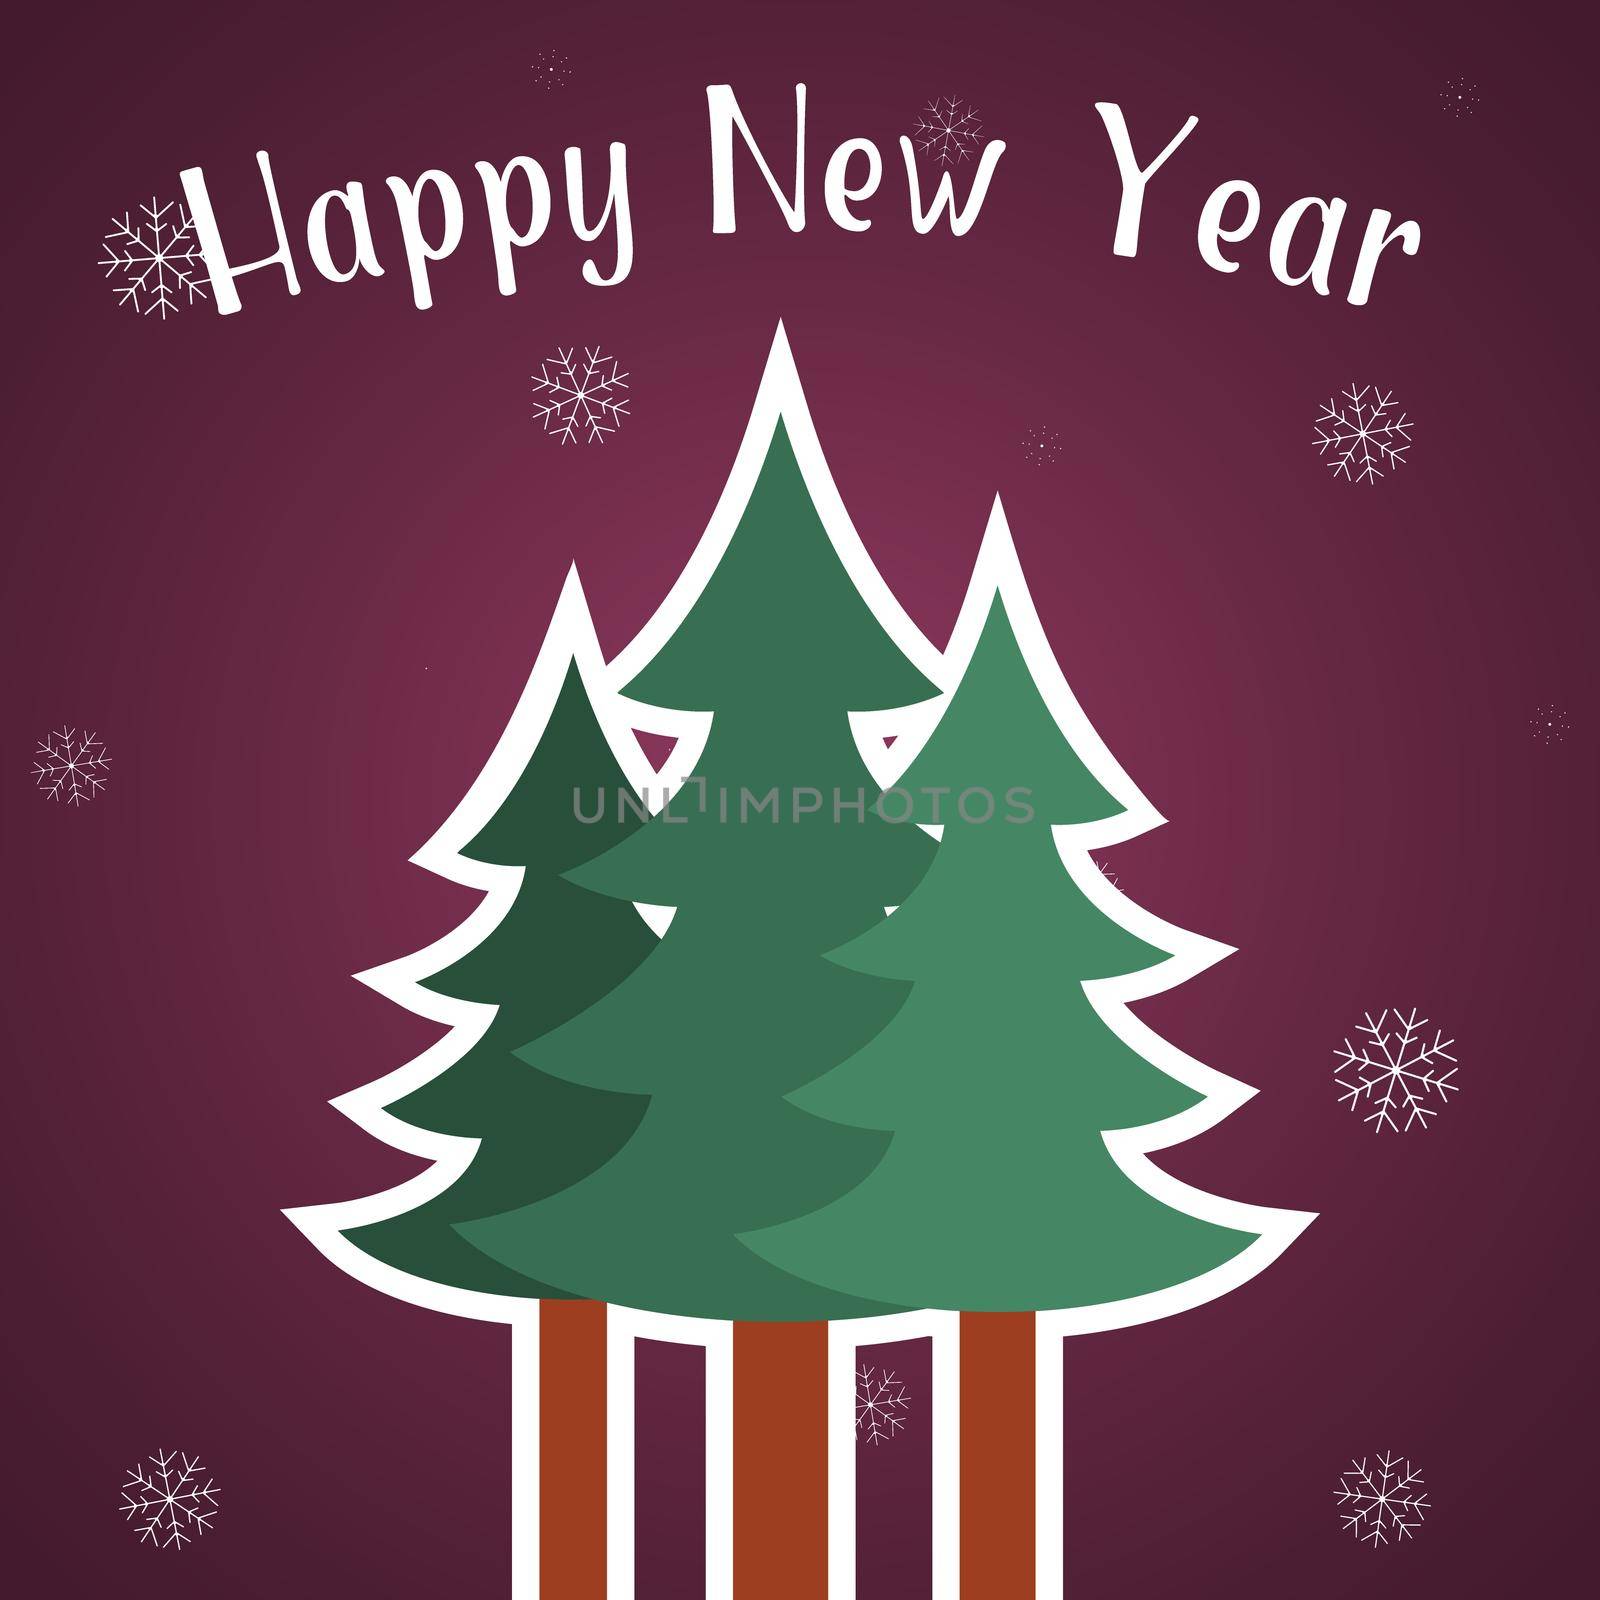 Happy New Year card template by Bobnevv